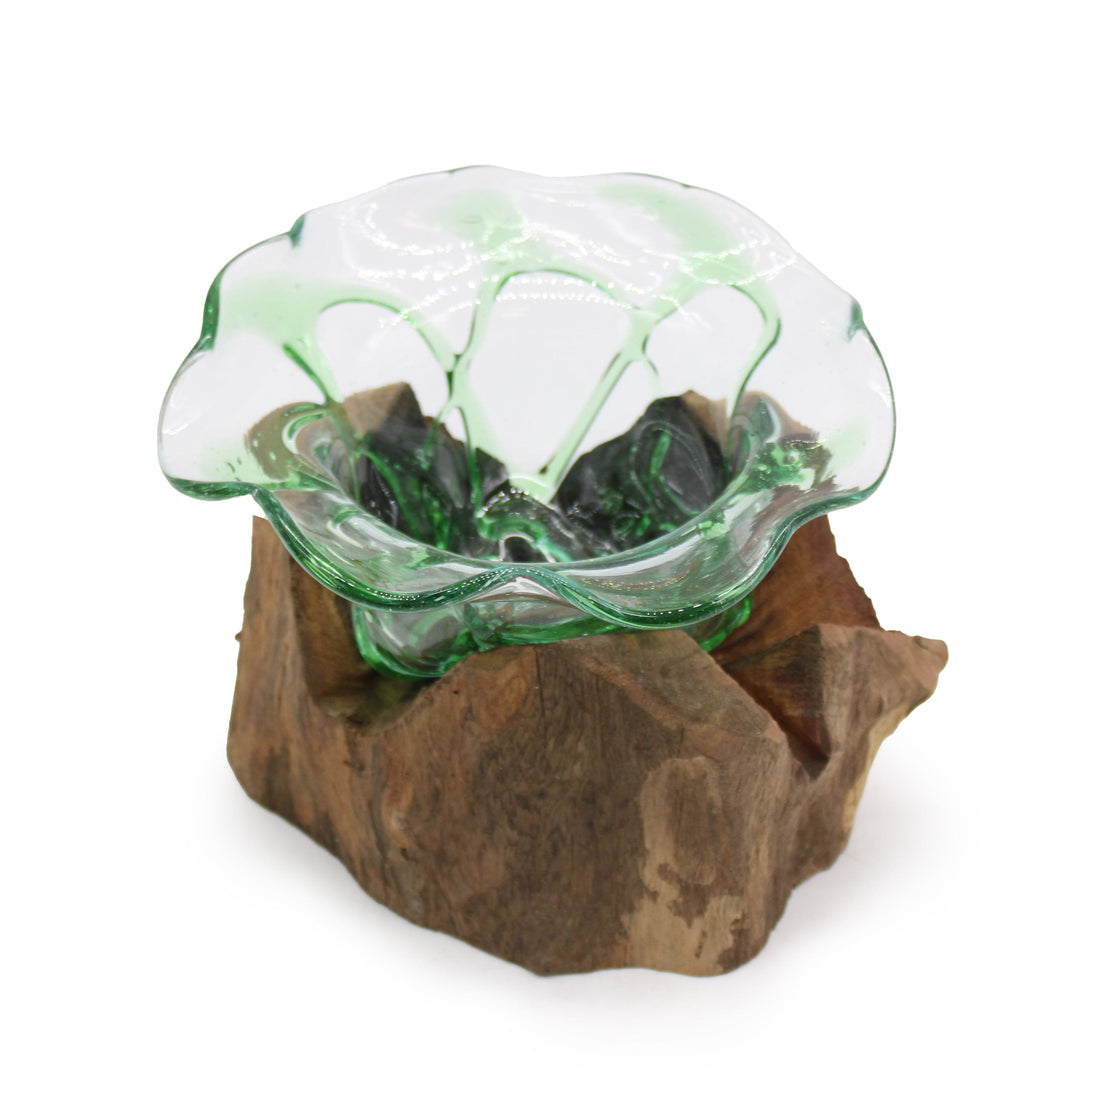 Recycled Beer Bottles - Large Fancy Sweet Bowl on Wood - best price from Maltashopper.com RBB-05